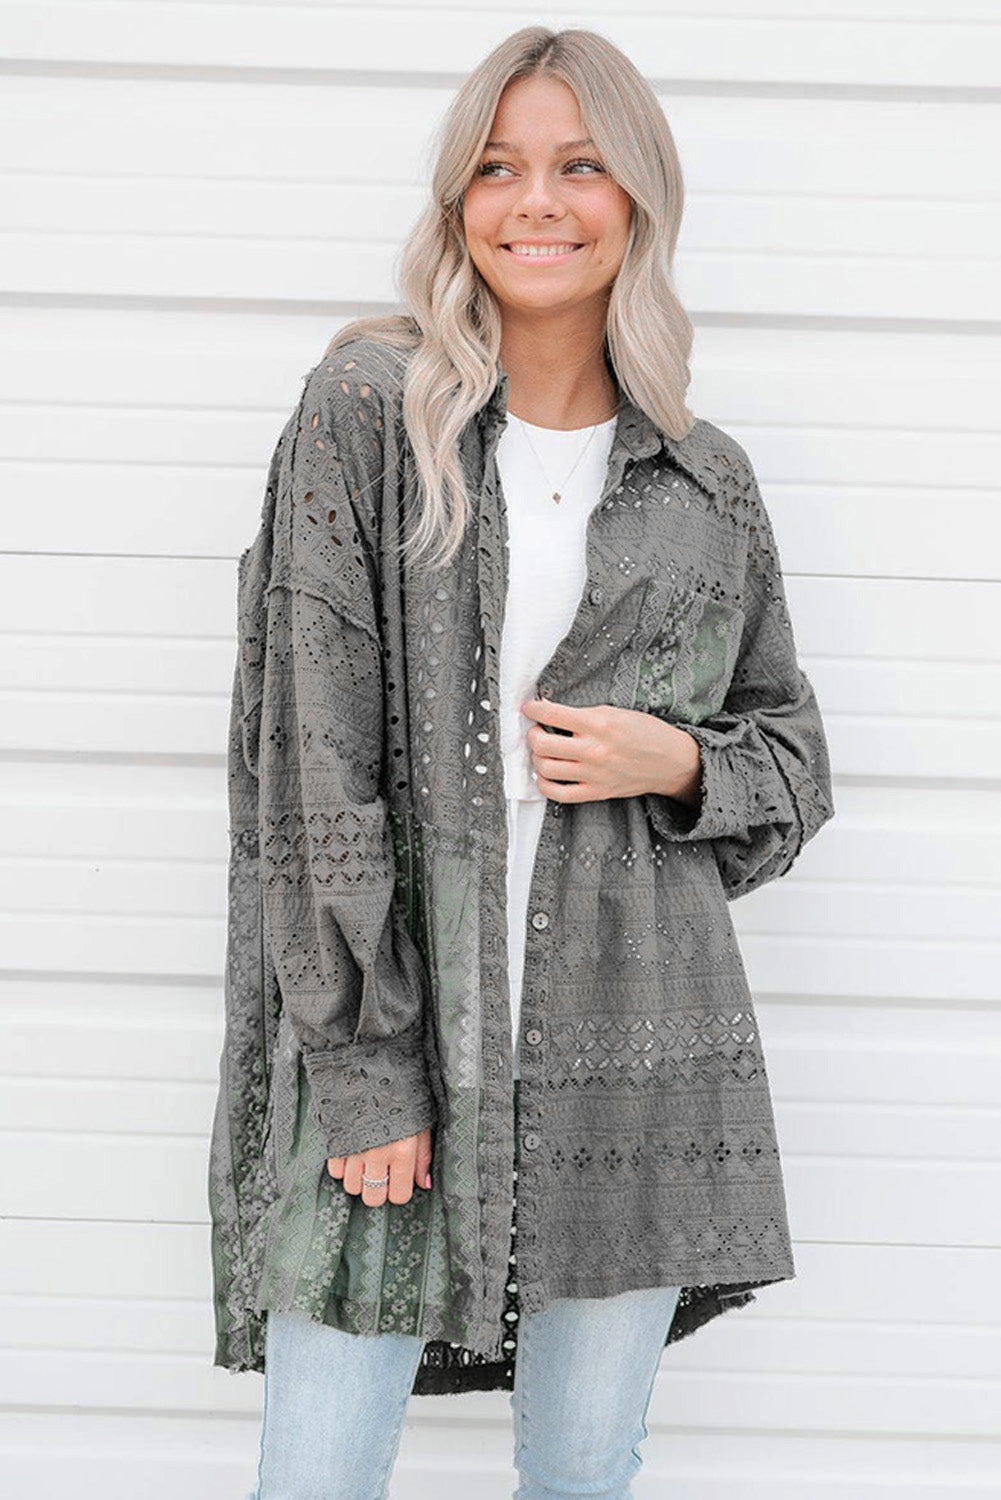 Eyelet Pattern Patchwork Oversized Button Up Women's Shacket - women's shacket at TFC&H Co.